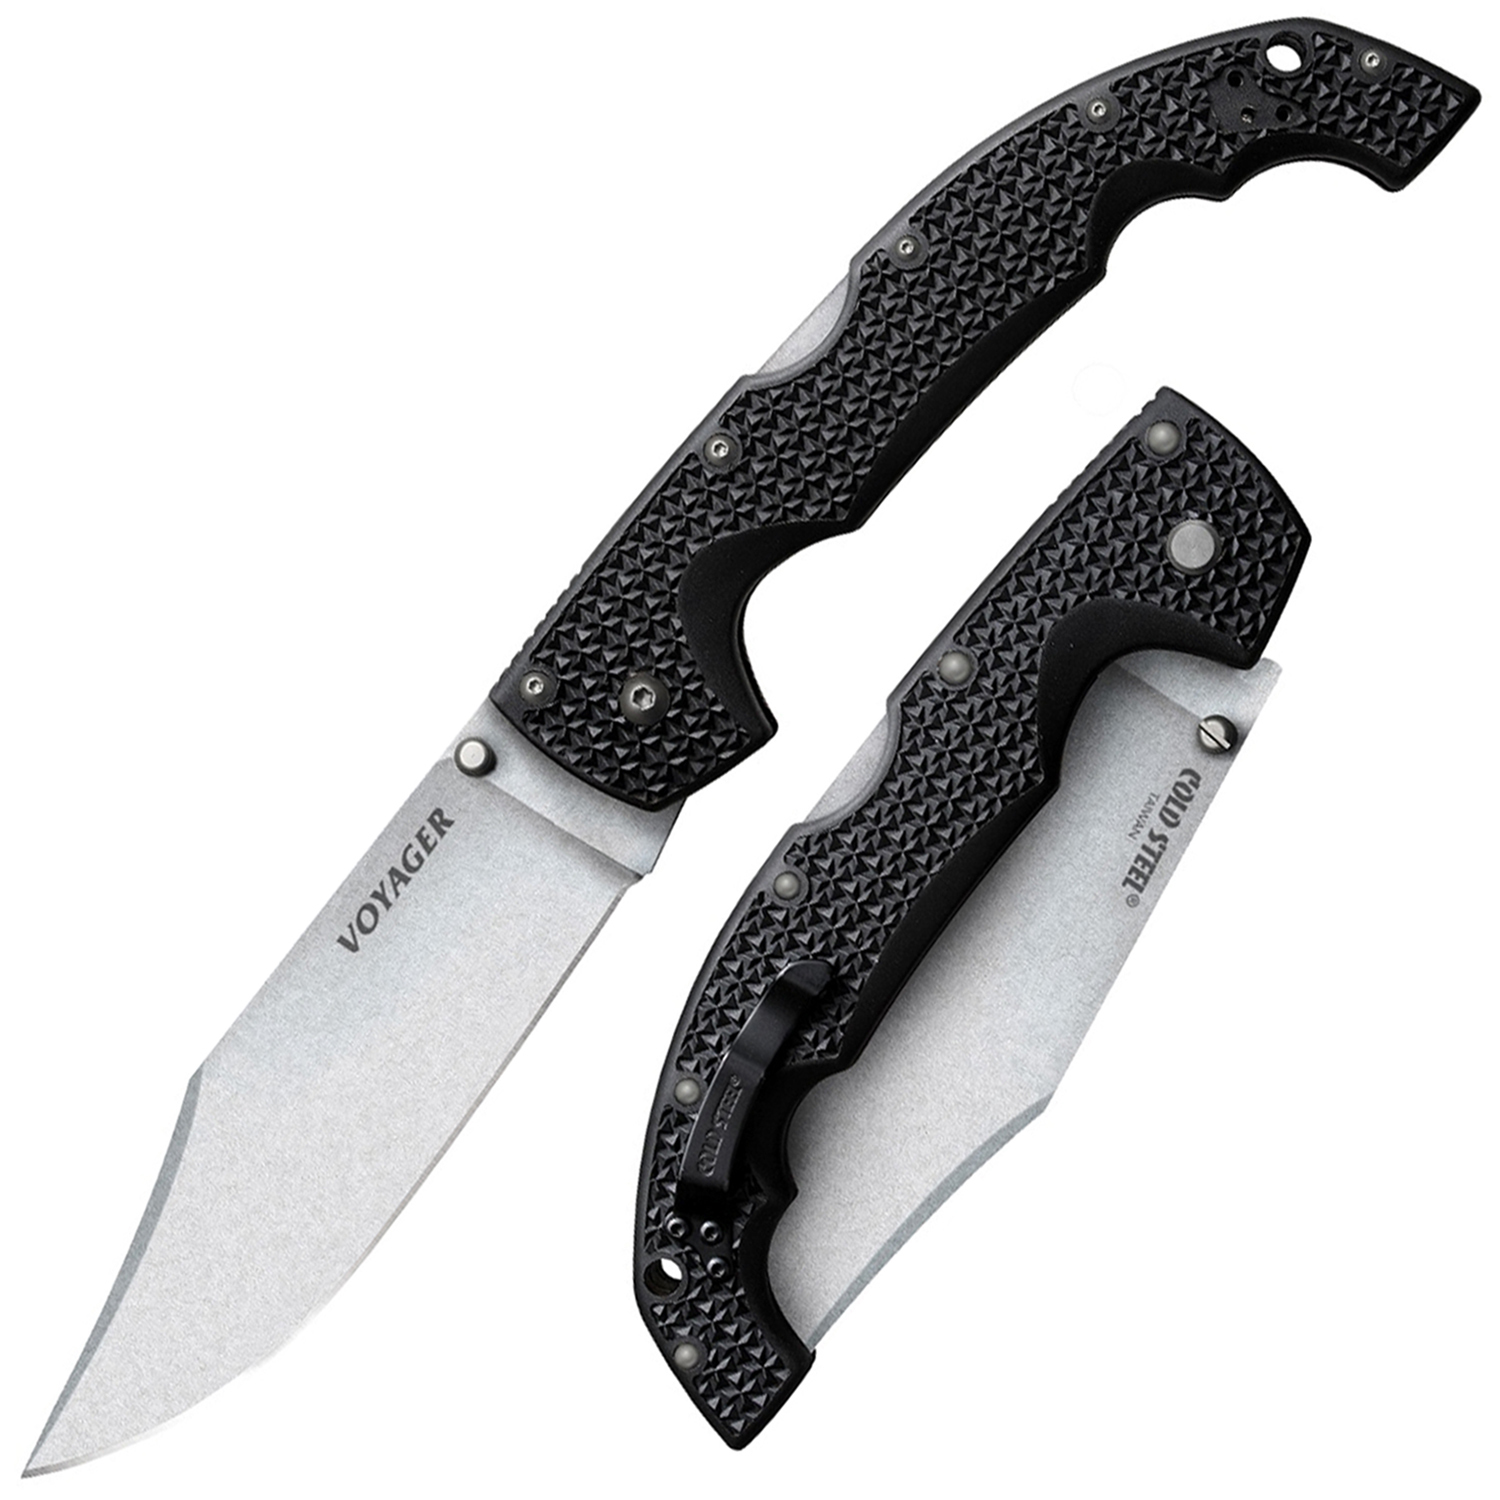   Cold Steel Voyager Clip Extra Large,  Aus-10A,  grivory, black